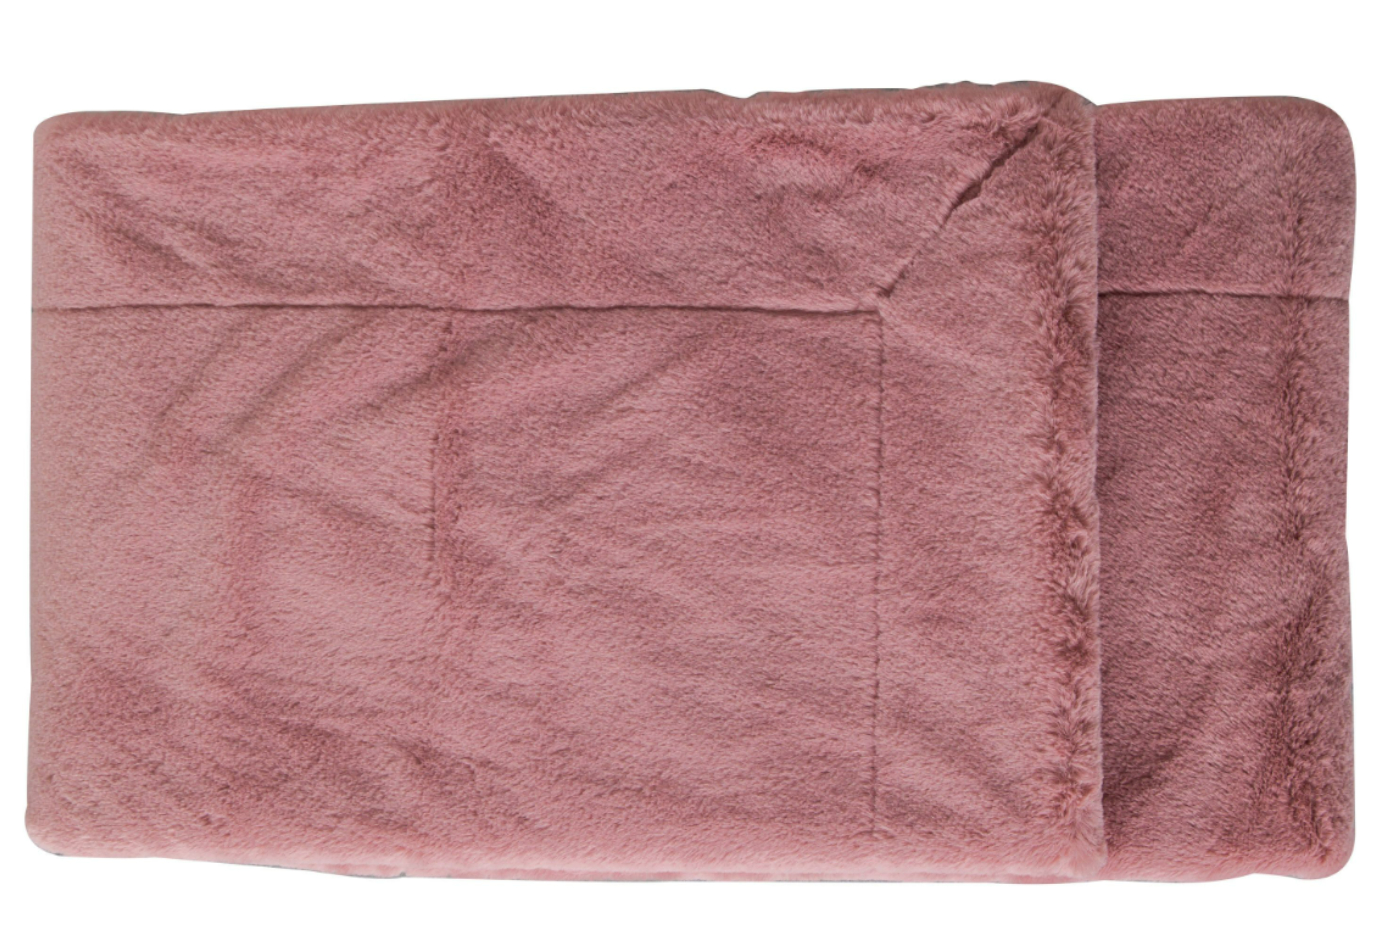 View Blush Faux Fur Throw With Stitched Fold Over Border Large information